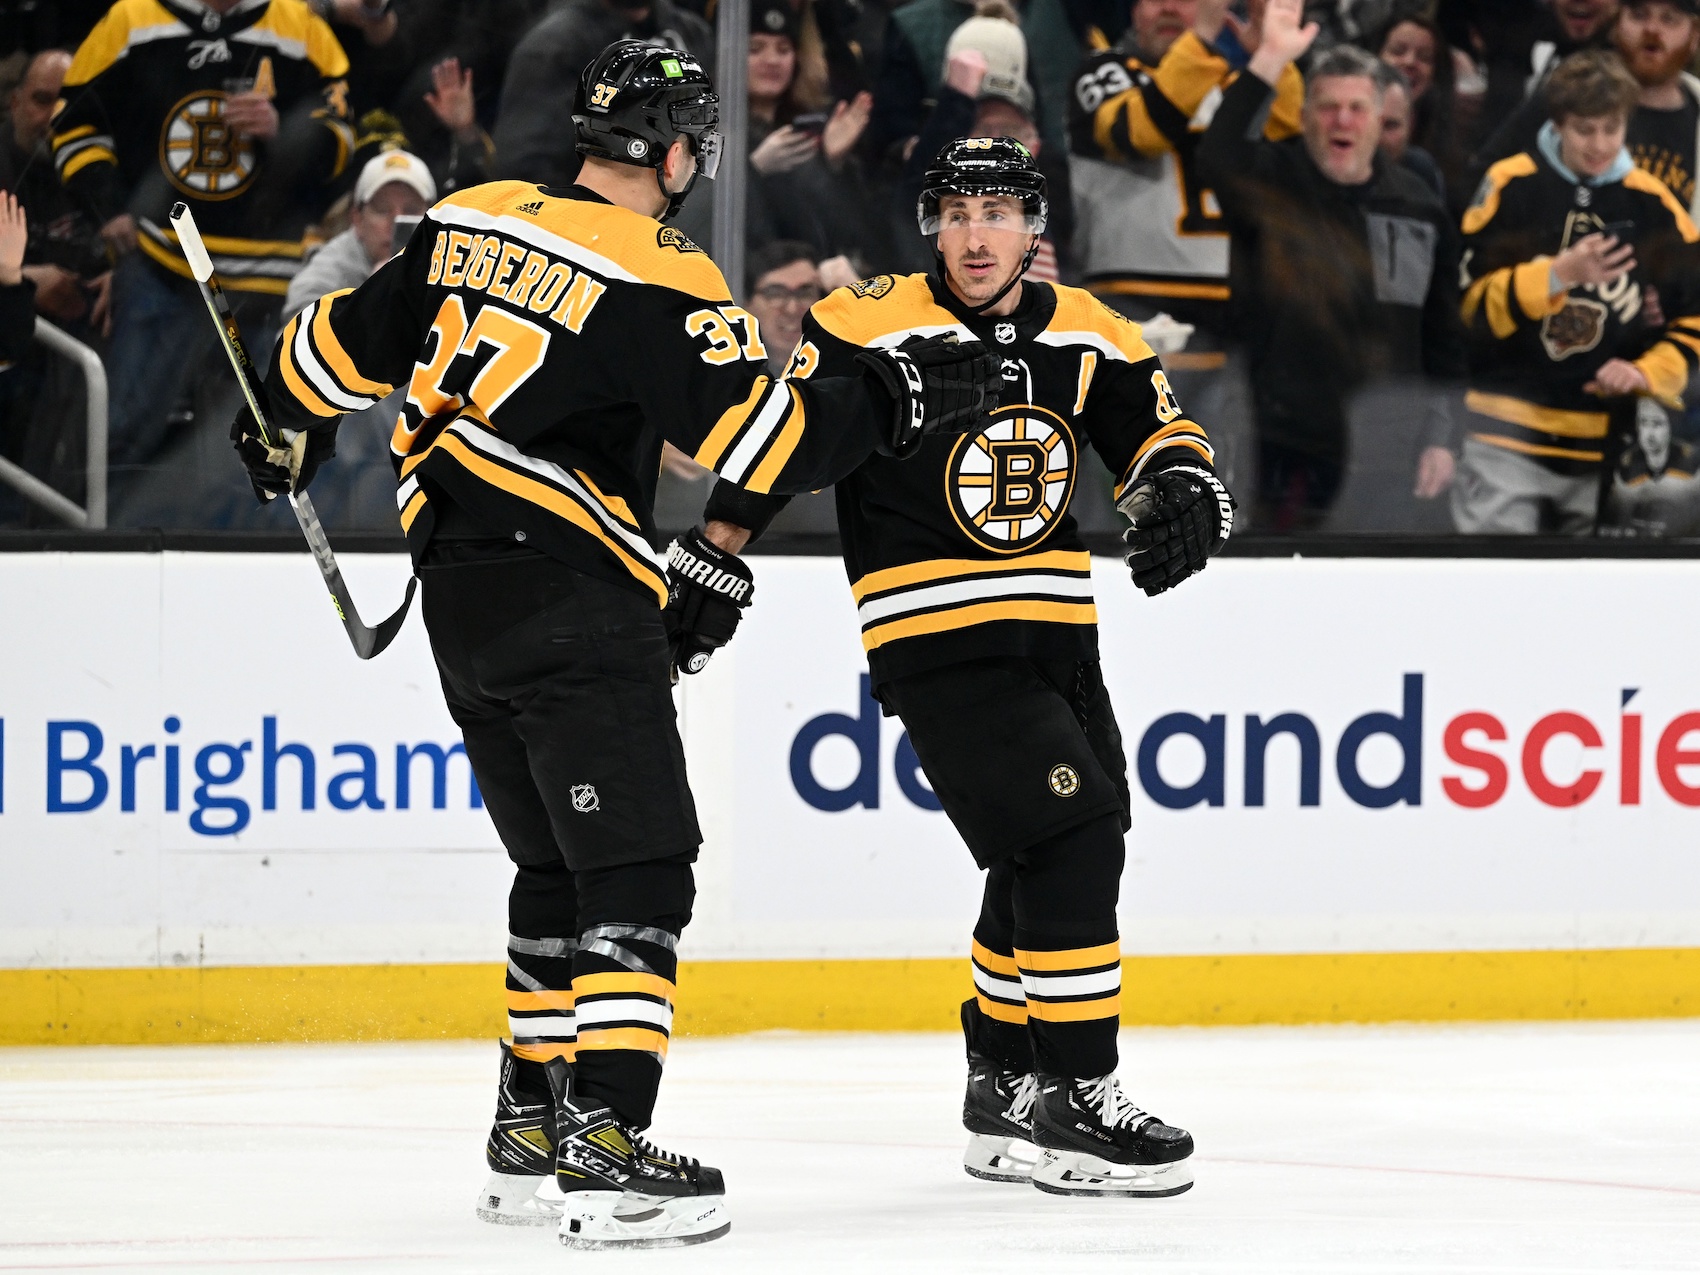 Mar 9, 2023; Boston, Massachusetts, USA; Boston Bruins left wing Brad Marchand (63) celebrates with center Patrice Bergeron (37) after scoring a goal against the Edmonton Oilers during the first period at the TD Garden. Mandatory Credit: Brian Fluharty-USA TODAY Sports